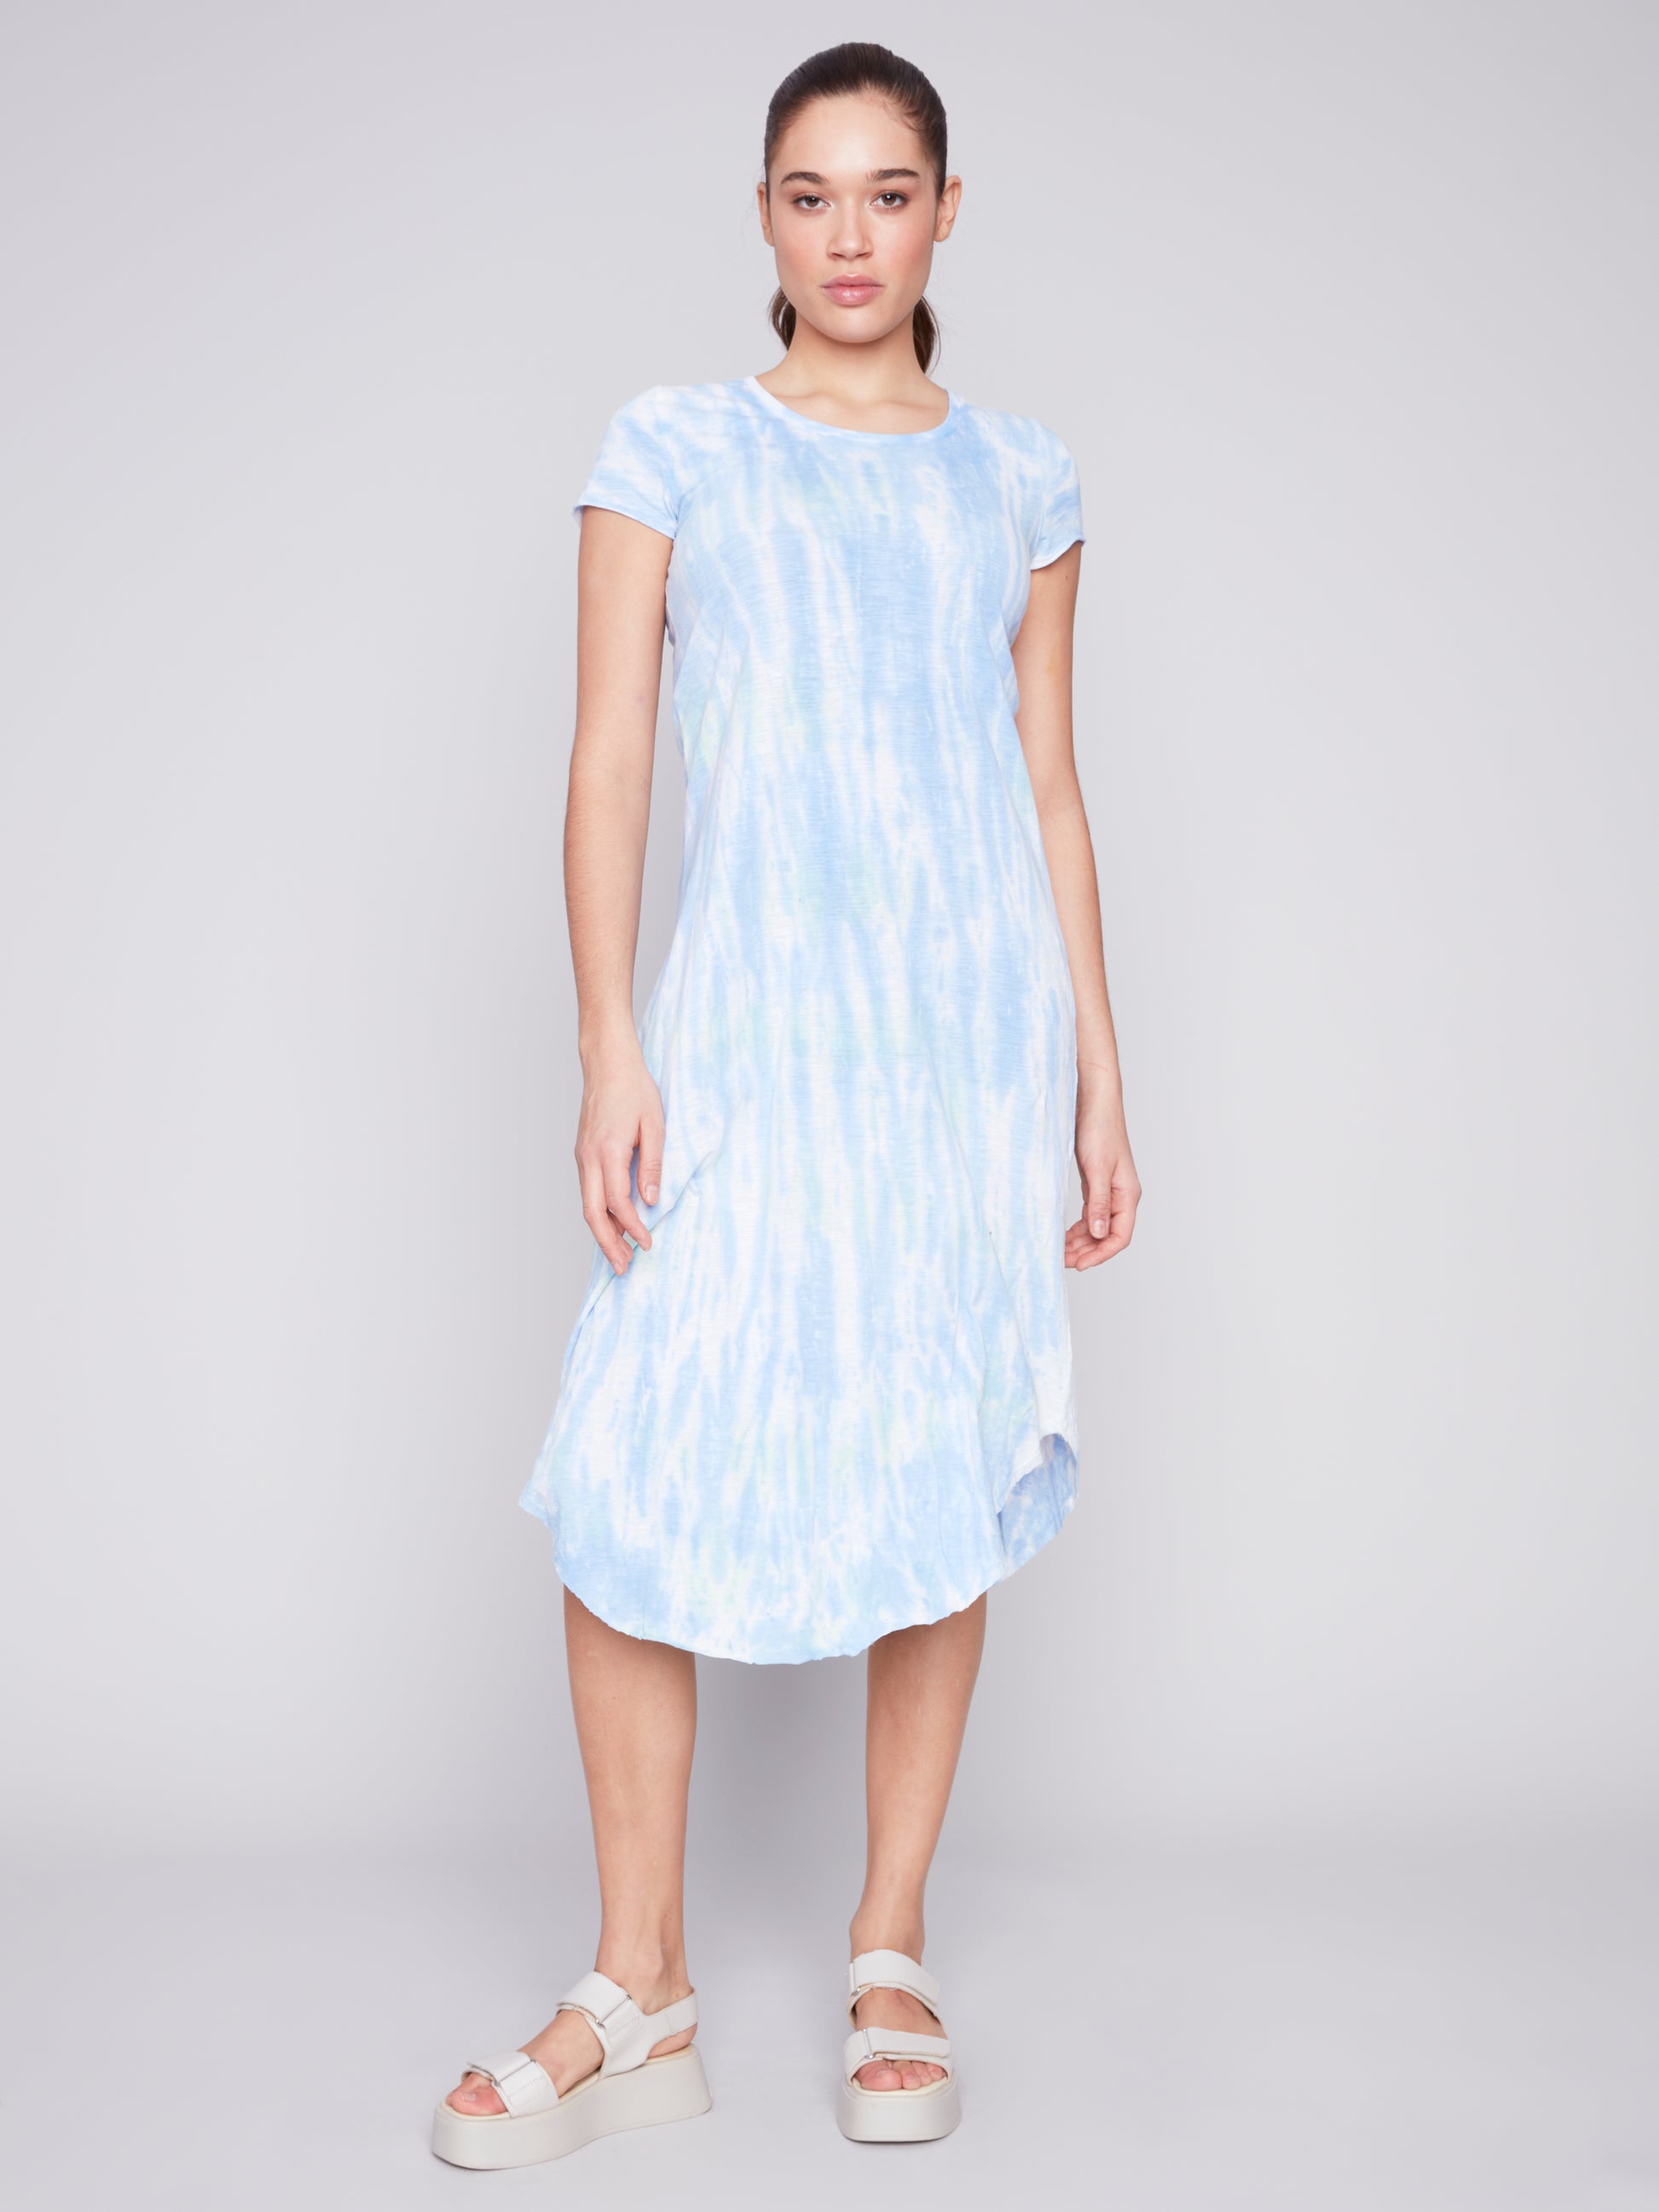 A woman wearing a Charlie B Ocean Wind Short Sleeve Dress, a high-quality fabric blue and white tie-dye summer dress with short sleeves, standing in a neutral pose against a grey background.